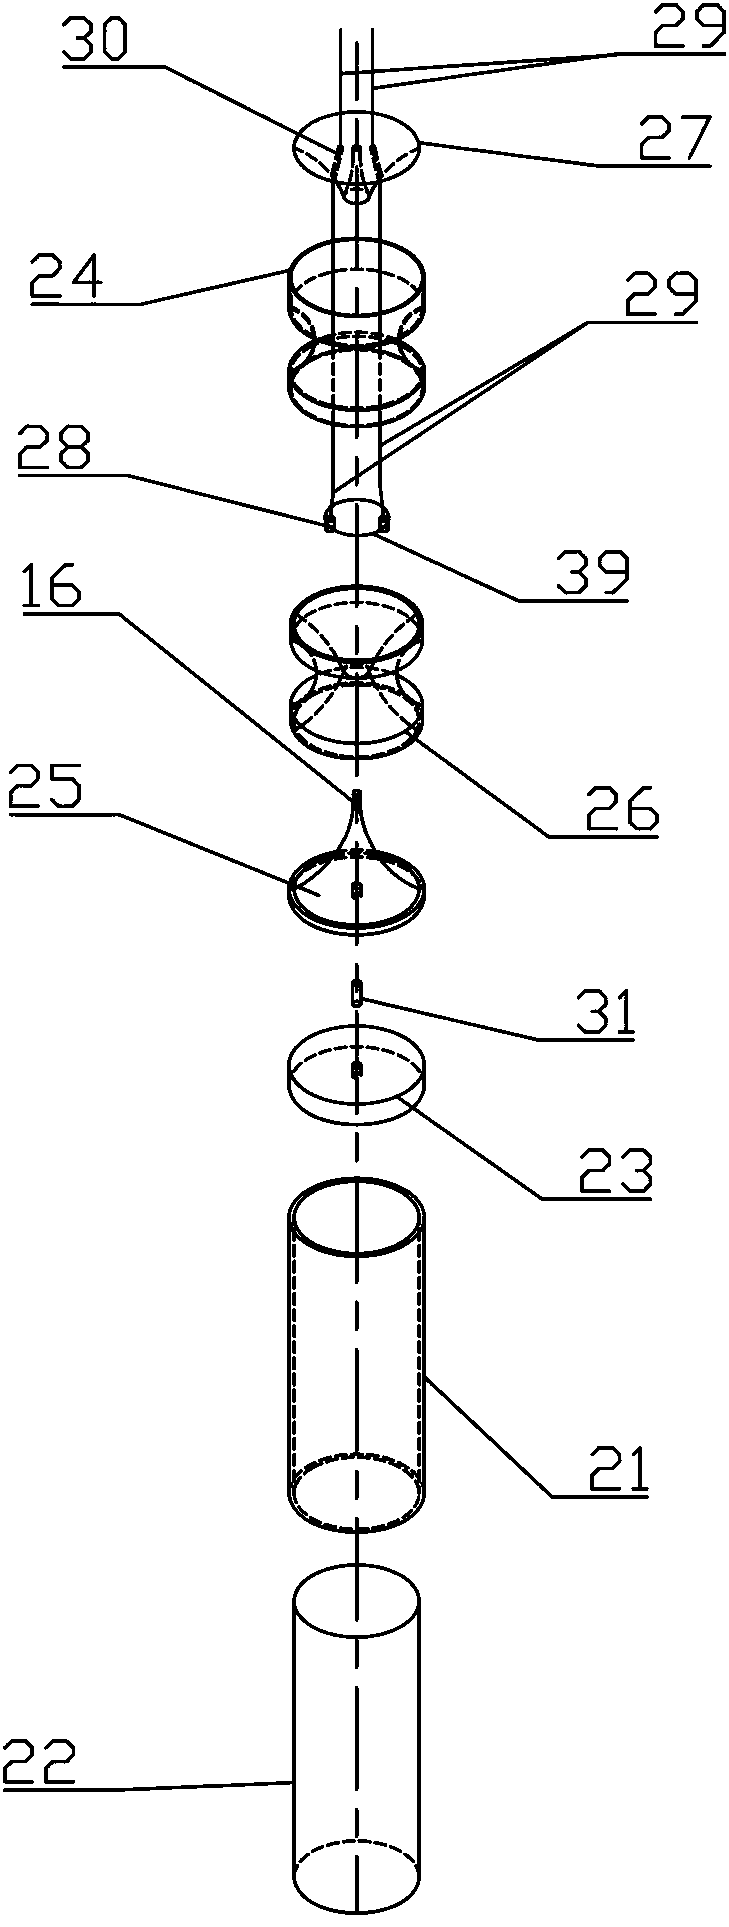 Composite reflection energy concentration and buffering energy dissipation device and blast construction method based on device